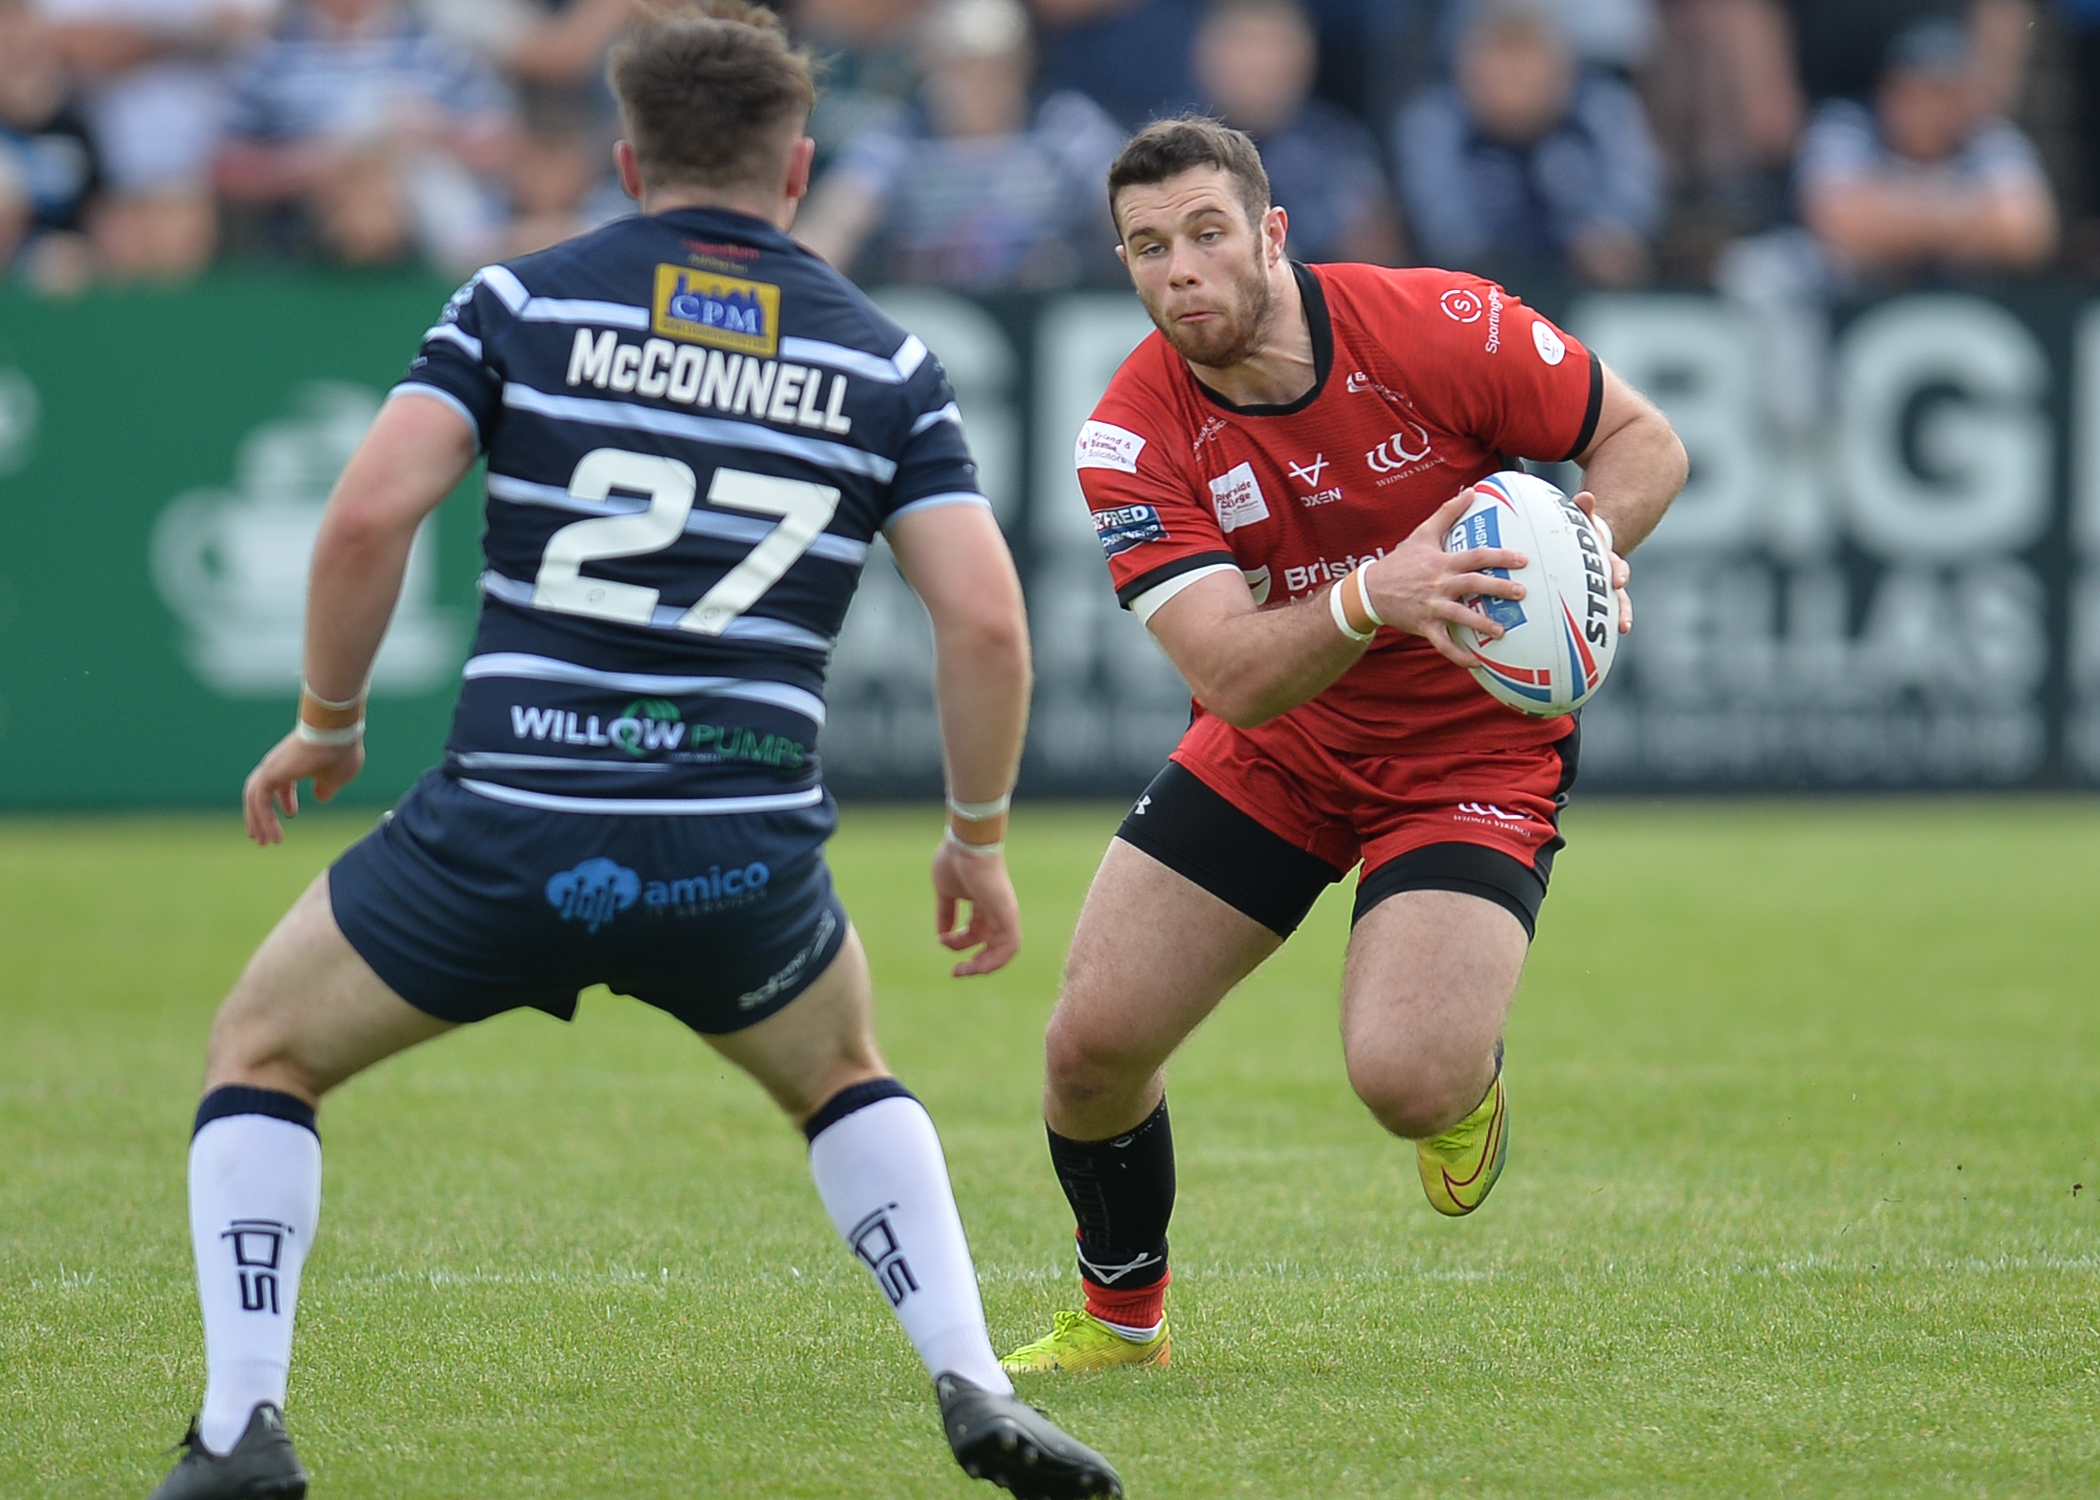 Featherstone fixture confirmed for Our League coverage